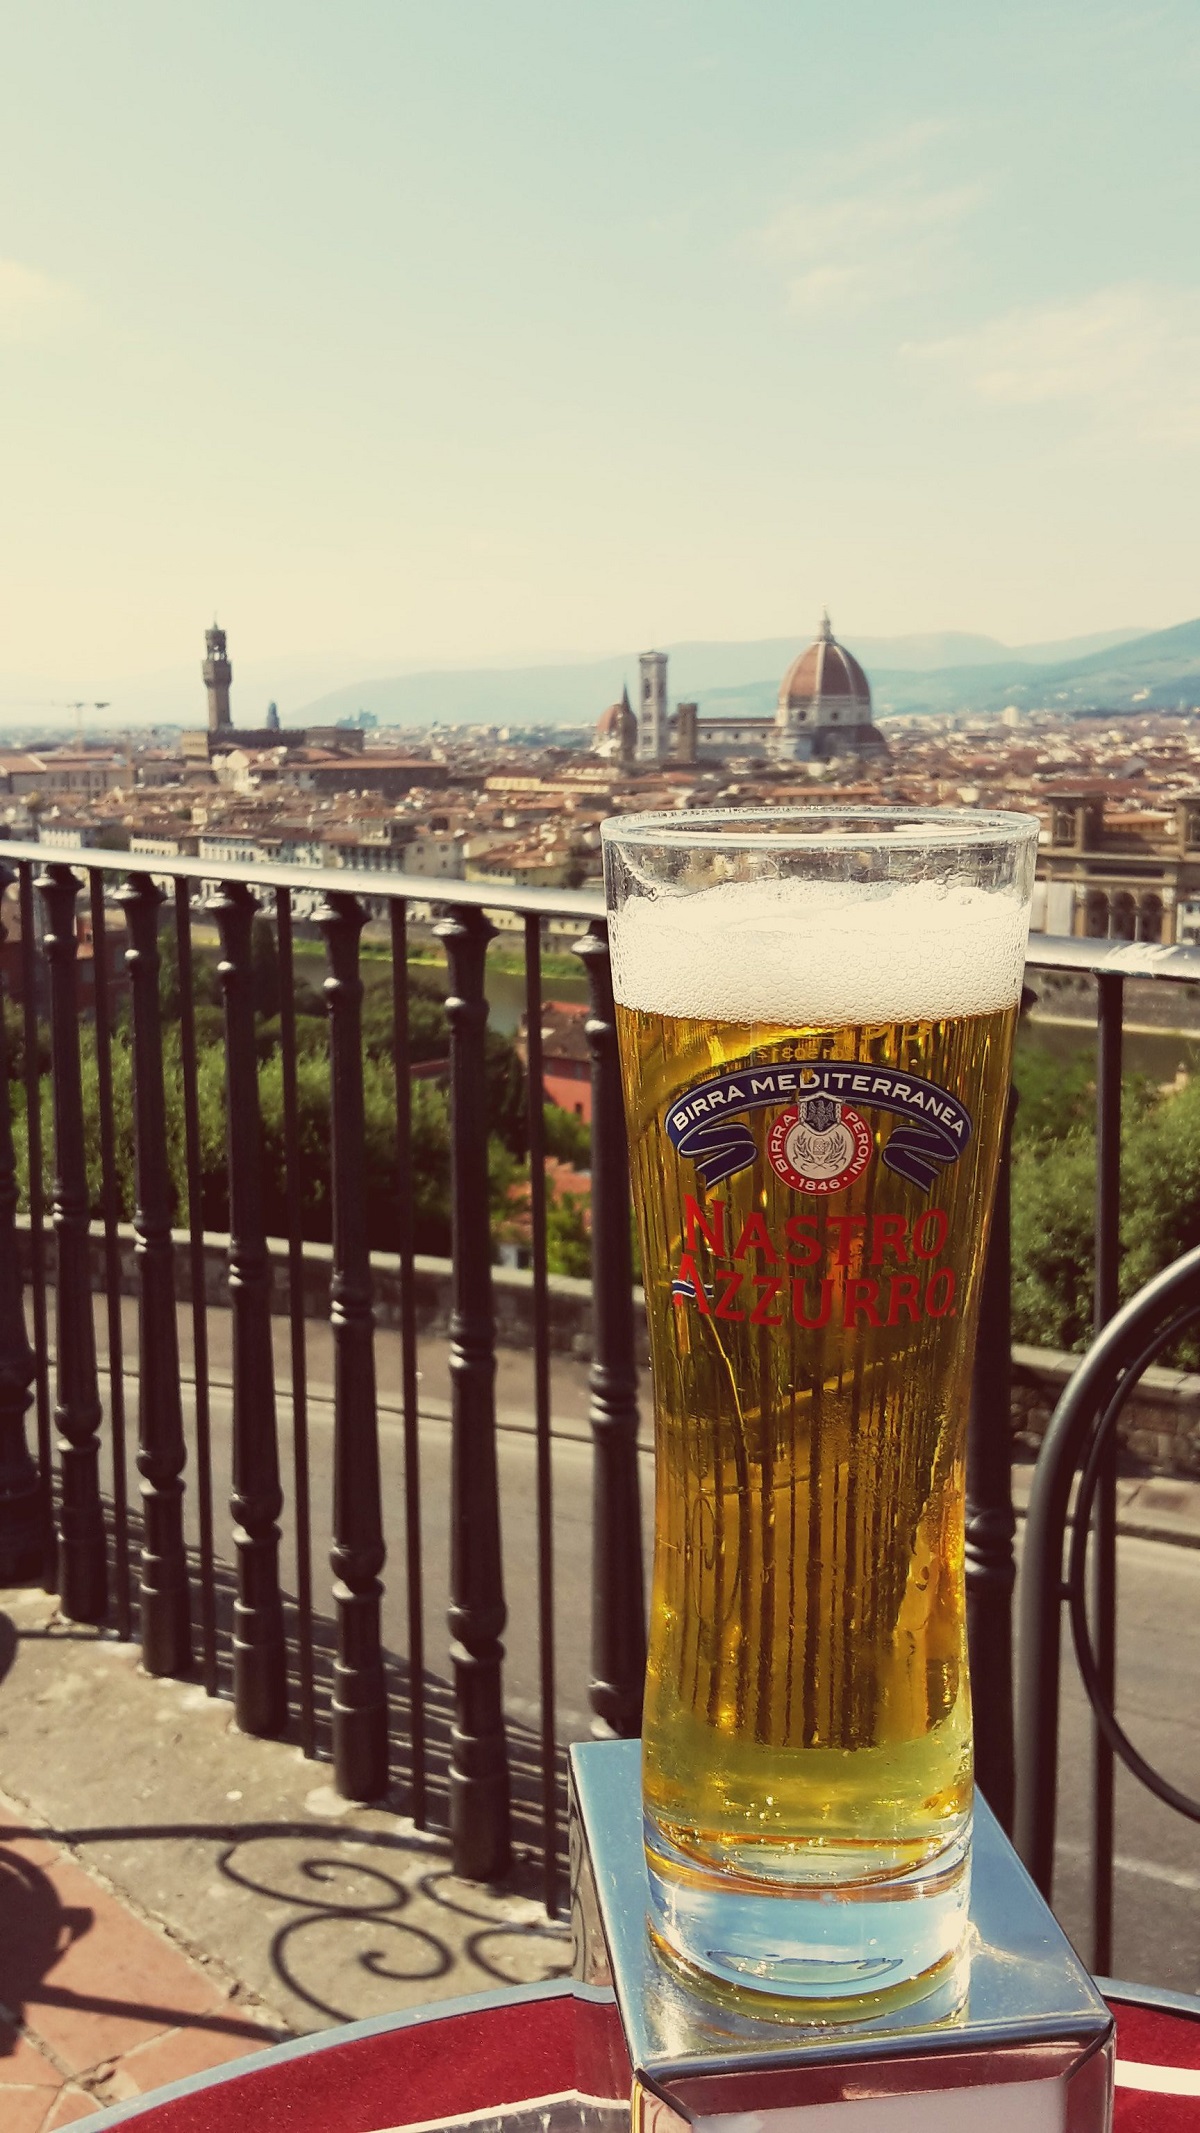 A long, tall glass of pale beer in the foreground with the Florence duomo in the background